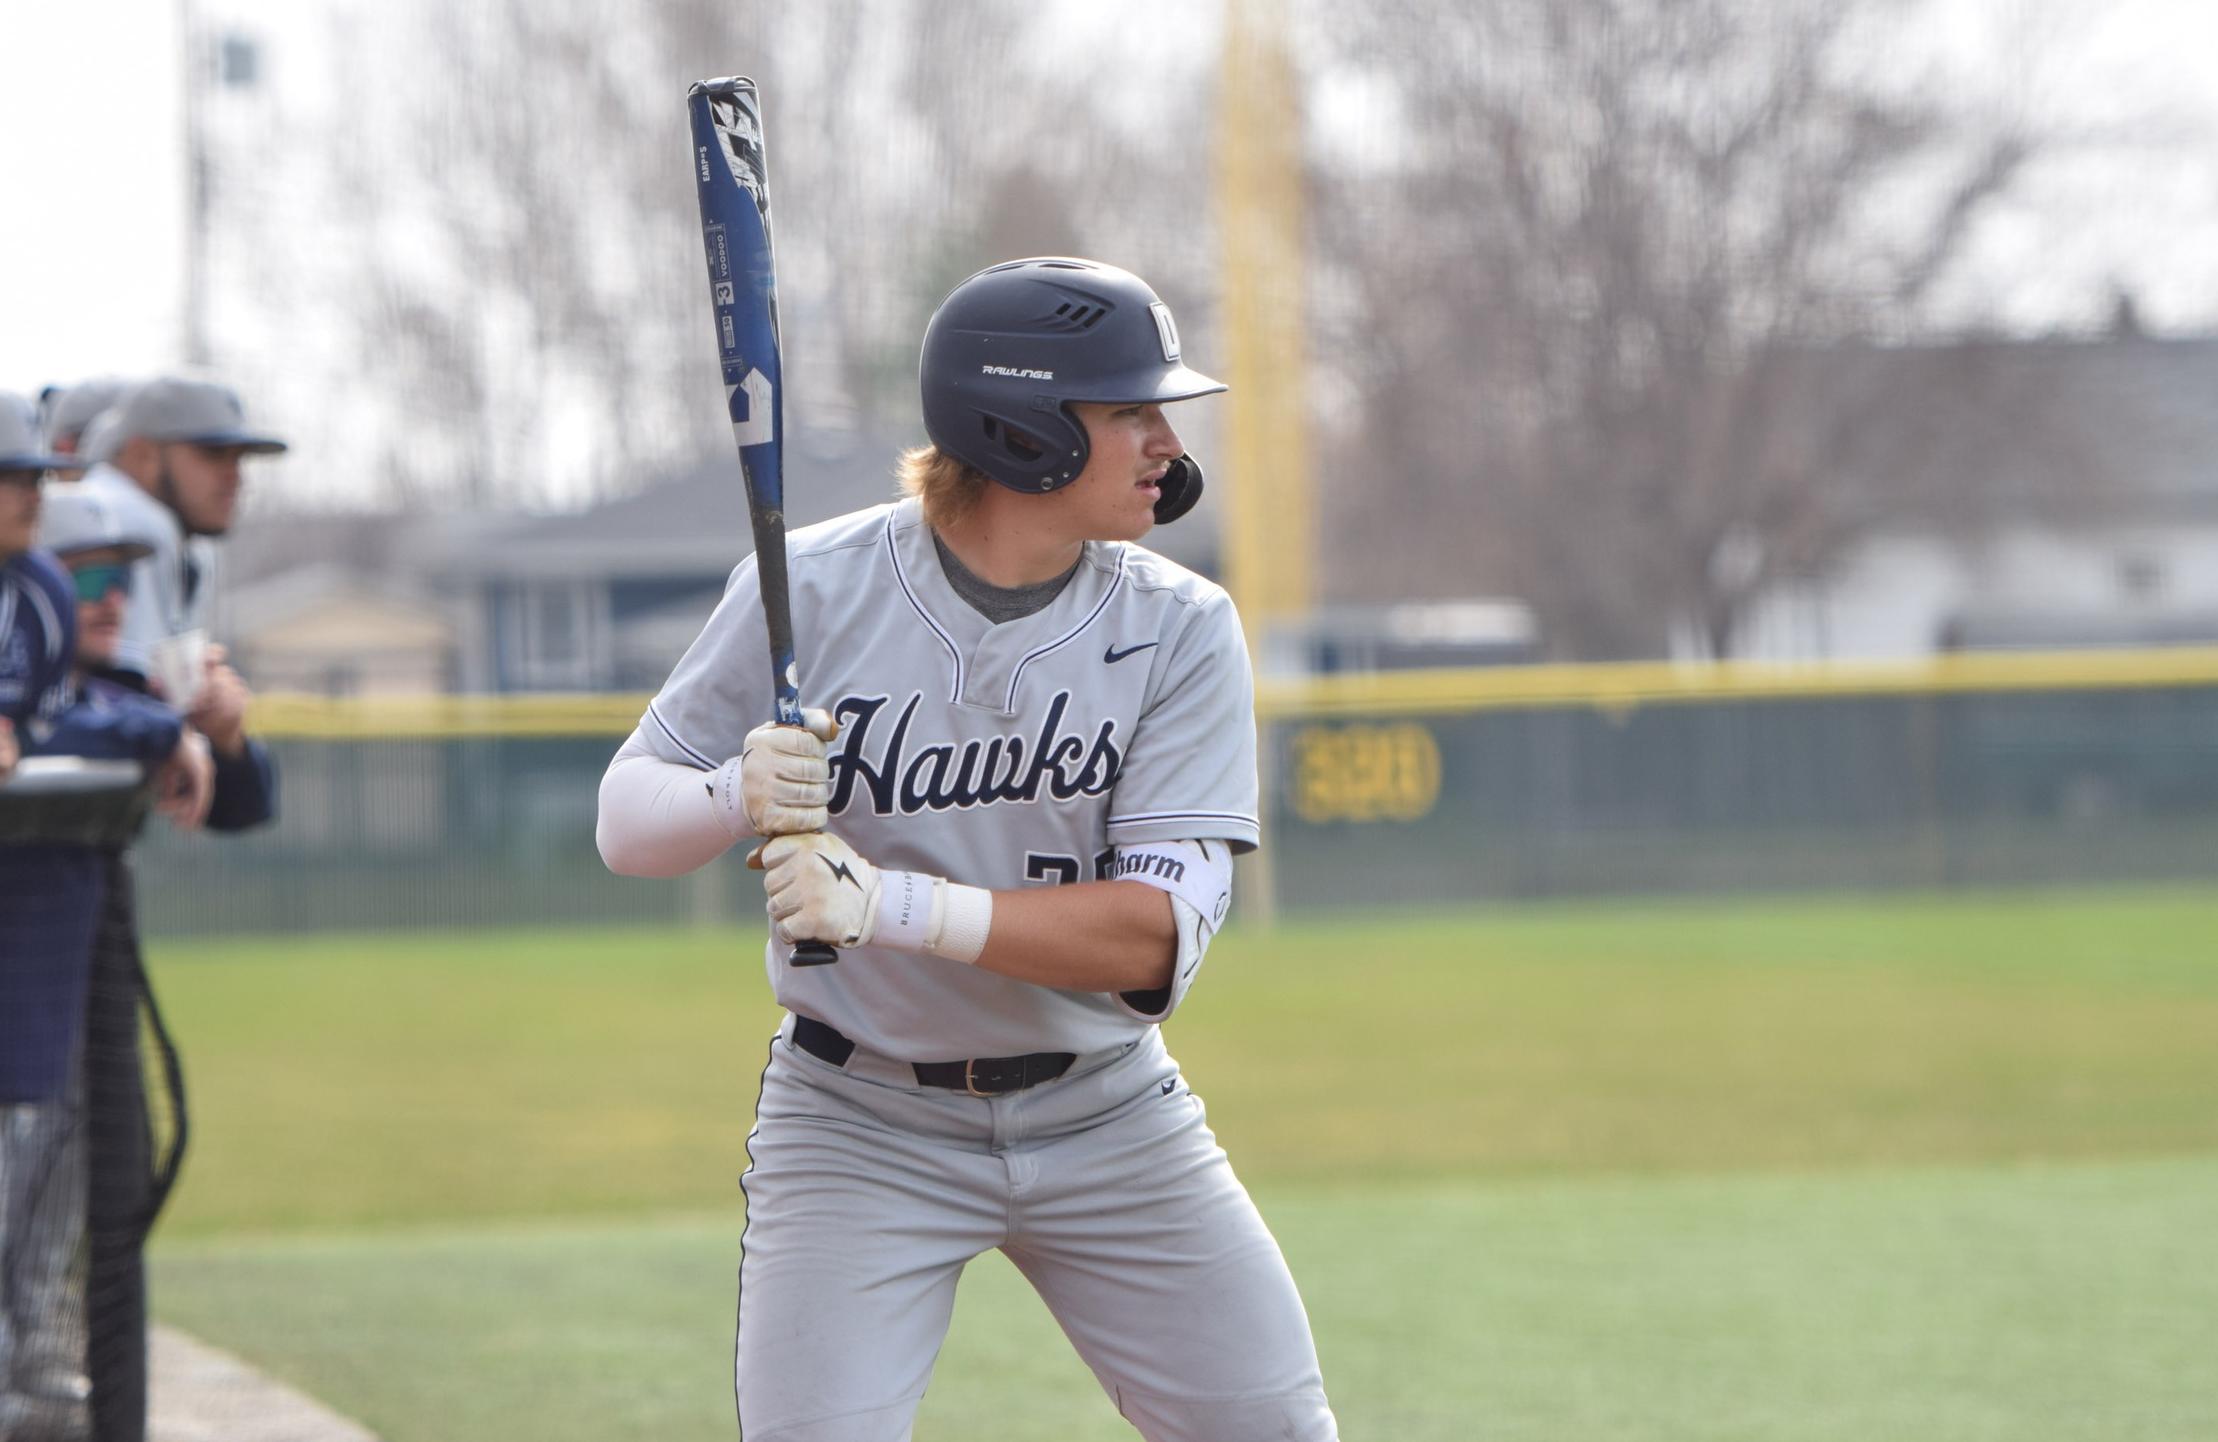 Blue Hawks take down NCAA D2 UMary in midweek action